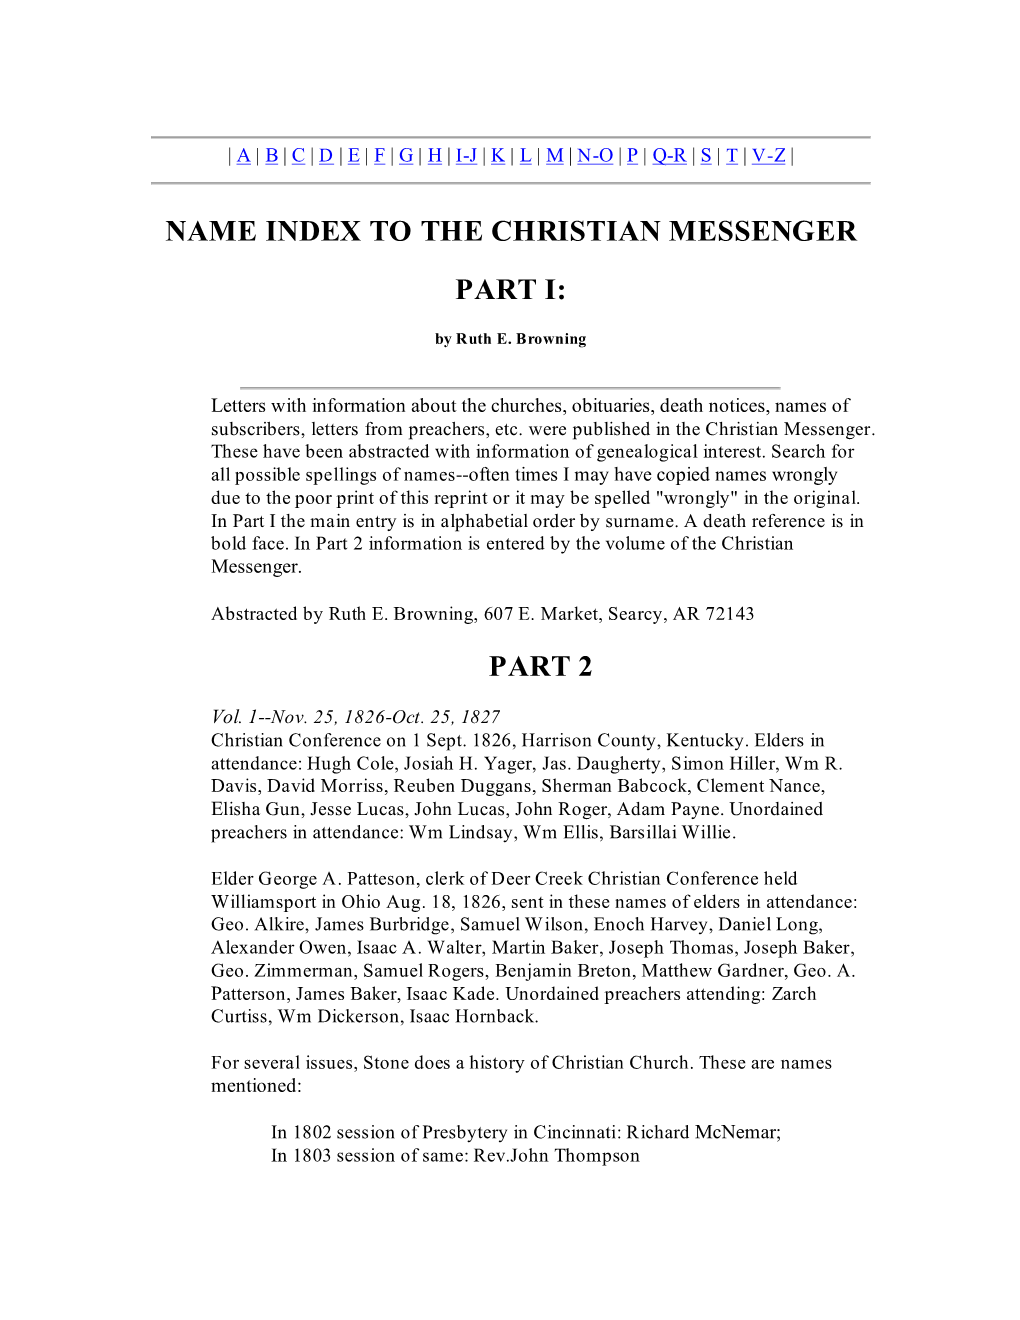 Name Index to the Christian Messenger Part I